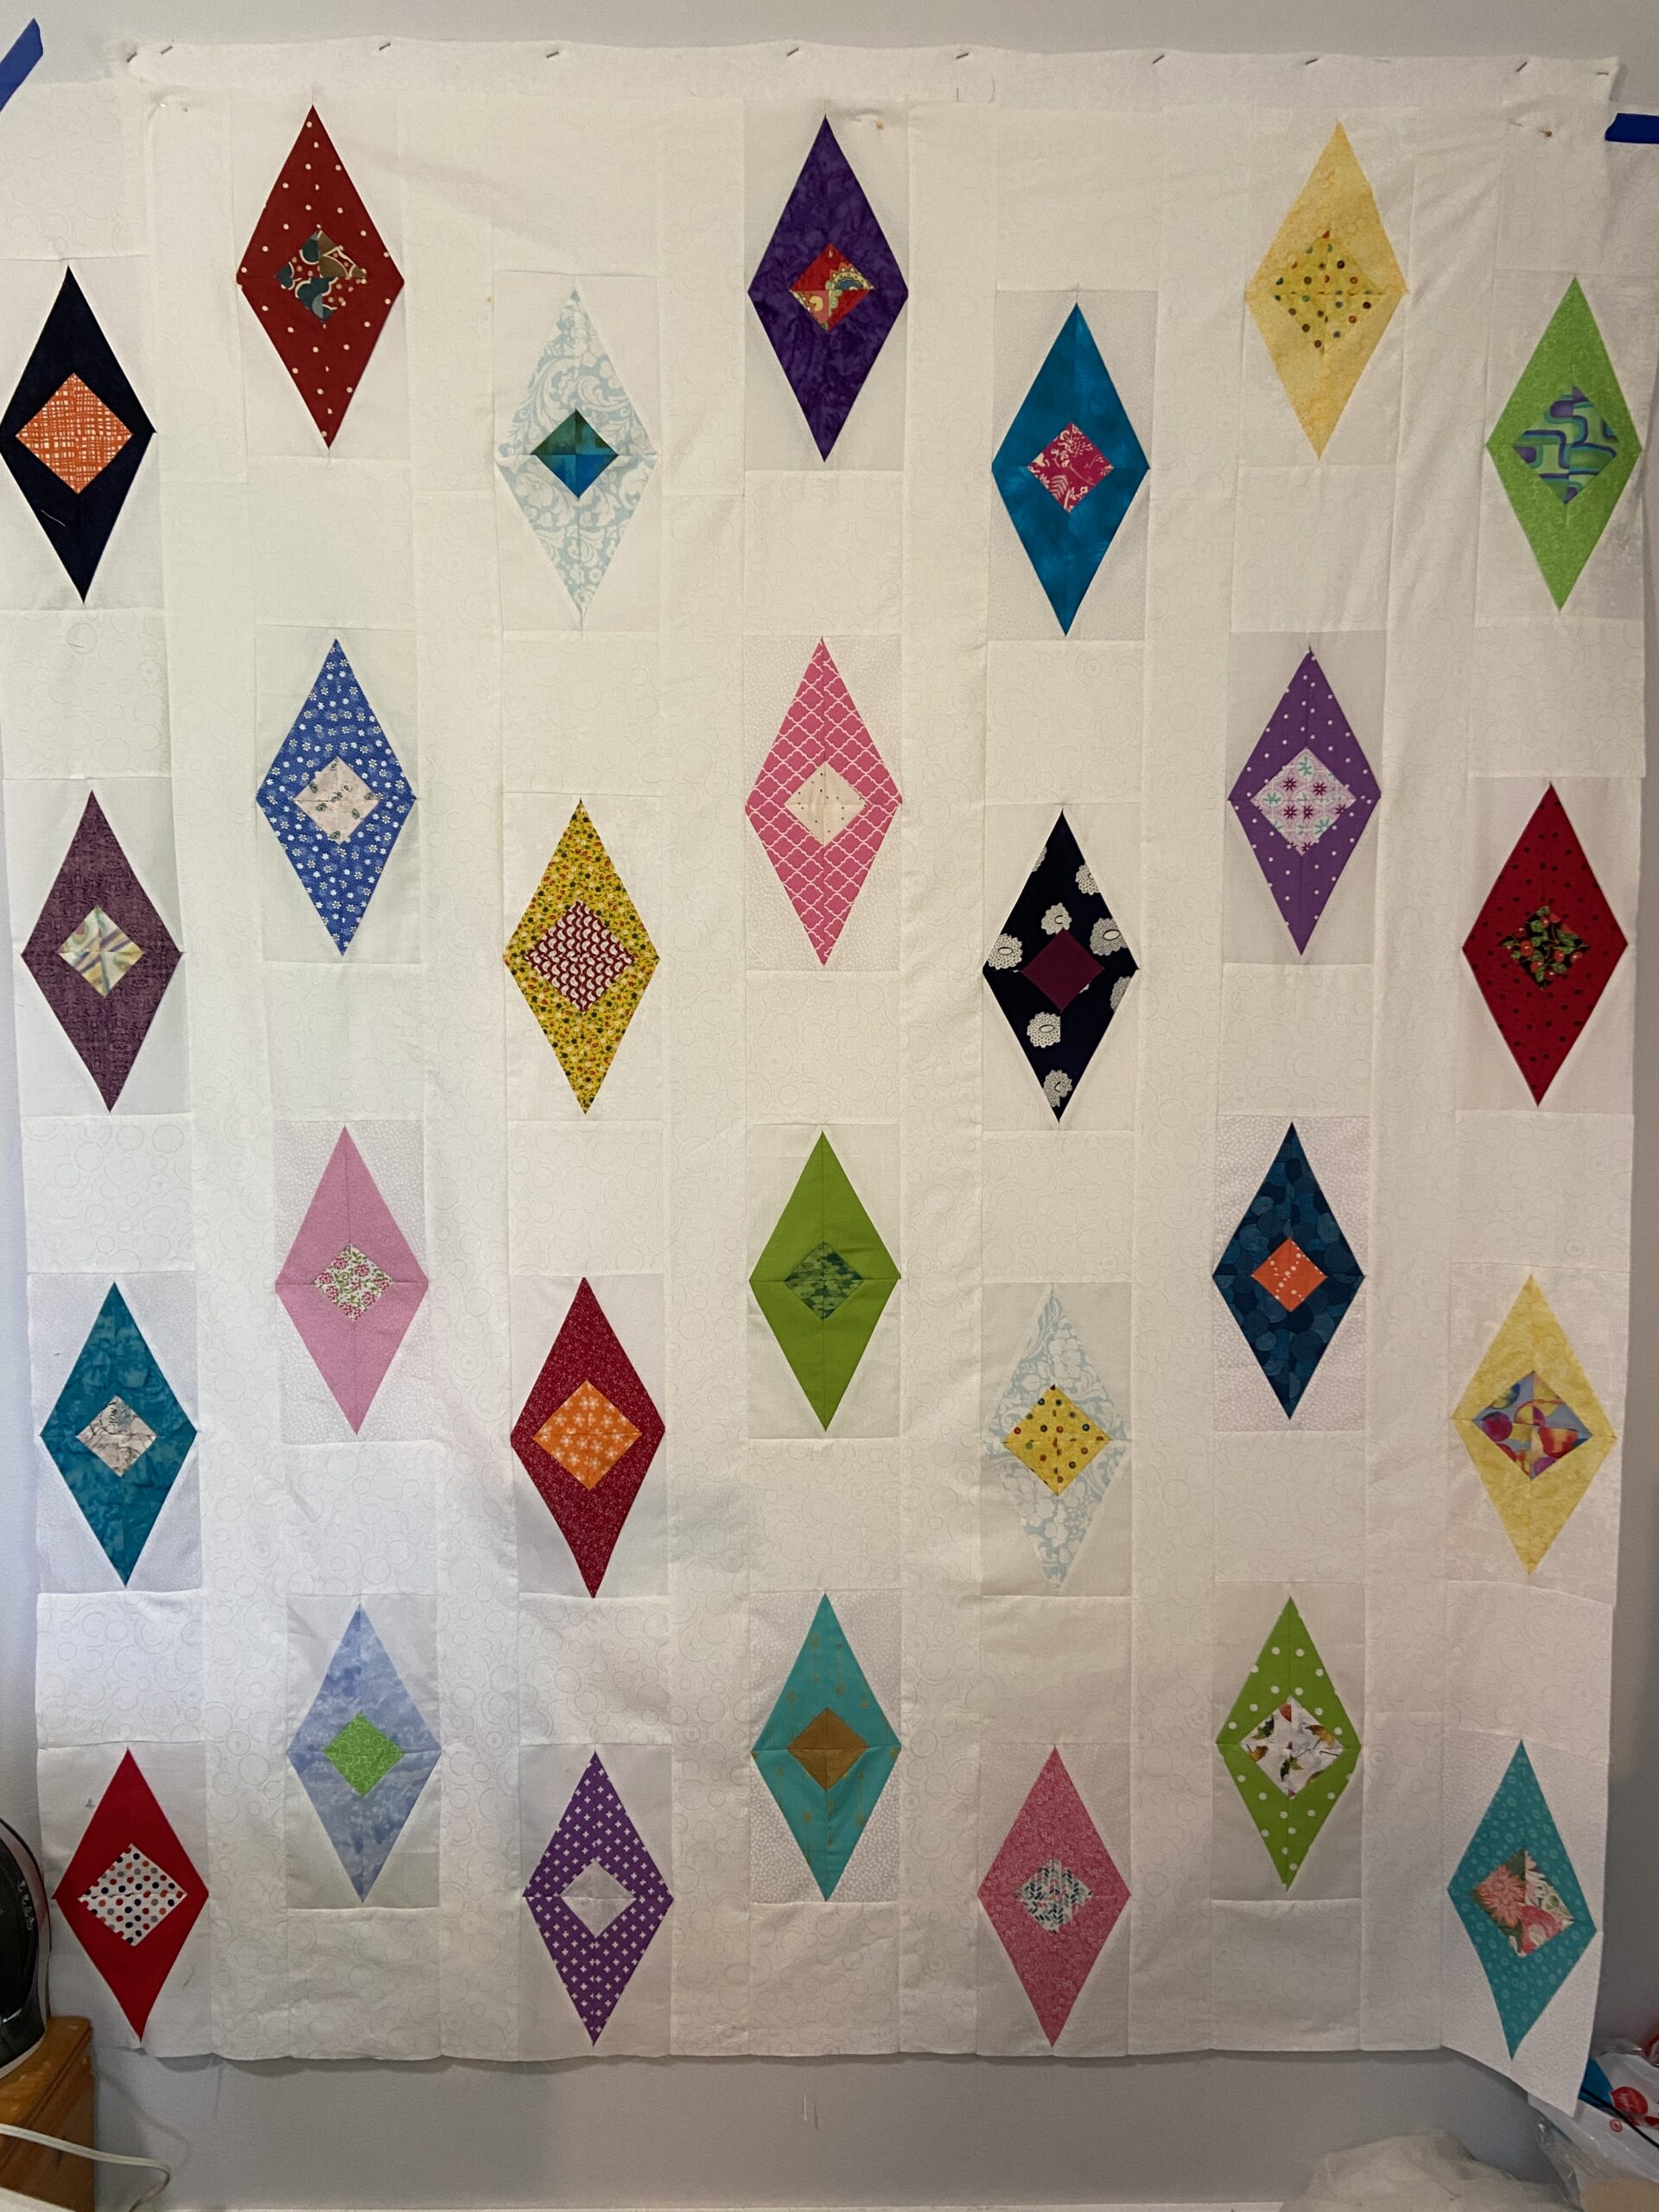 5 Super Easy Quilting Designs You Didn't Know Your Walking Foot Could Make